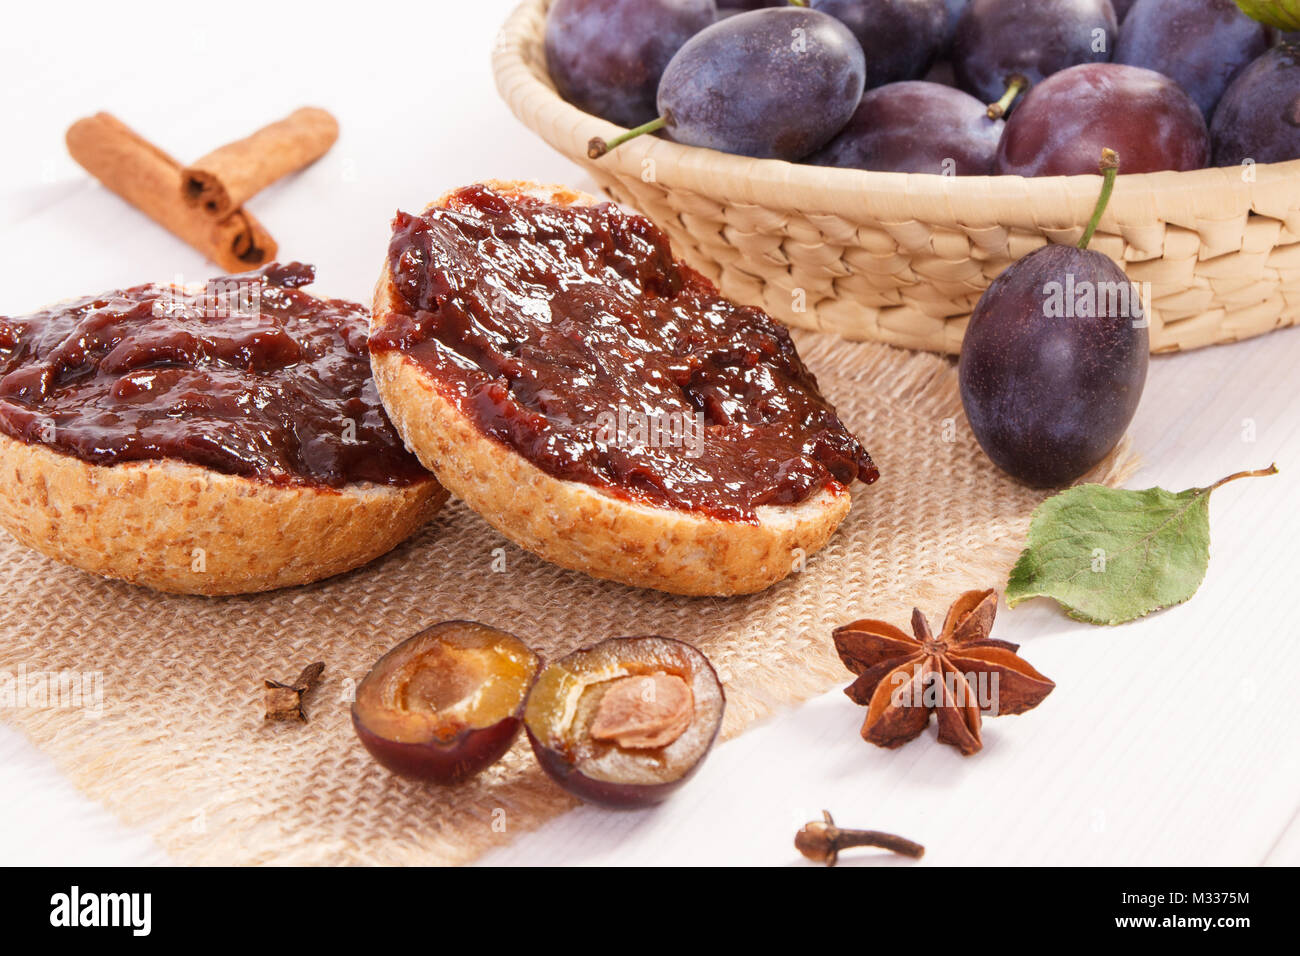 Fresh prepared sandwiches with plum marmalade or jam, concept of delicious breakfast Stock Photo